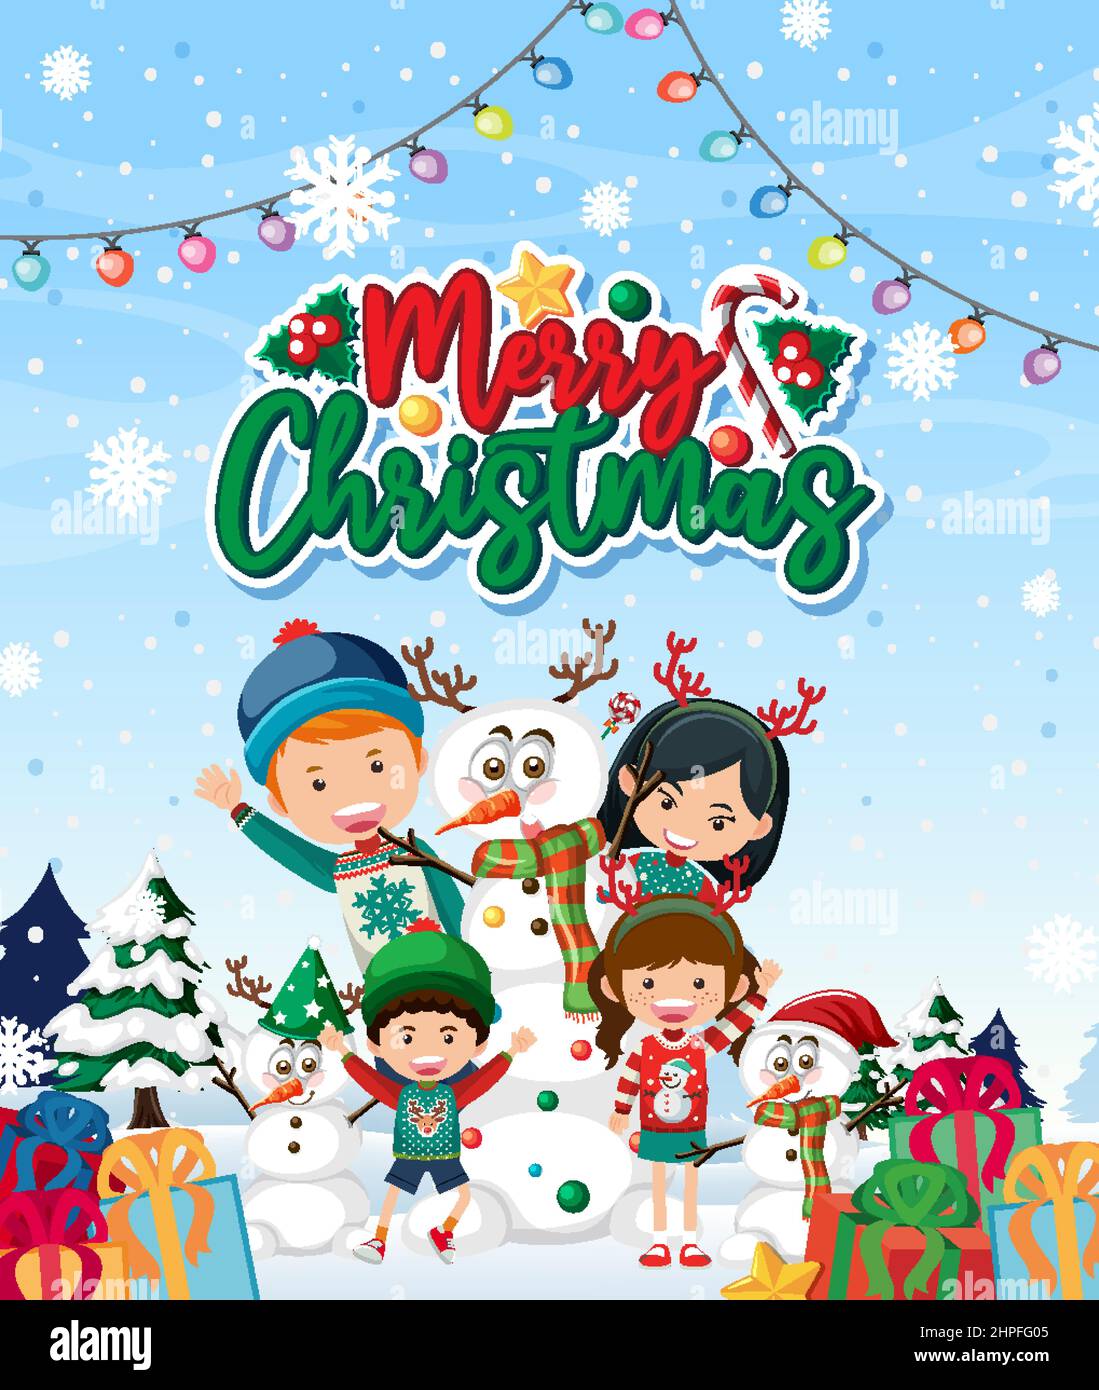 Merry Christmas poster with happy family illustration Stock Vector ...